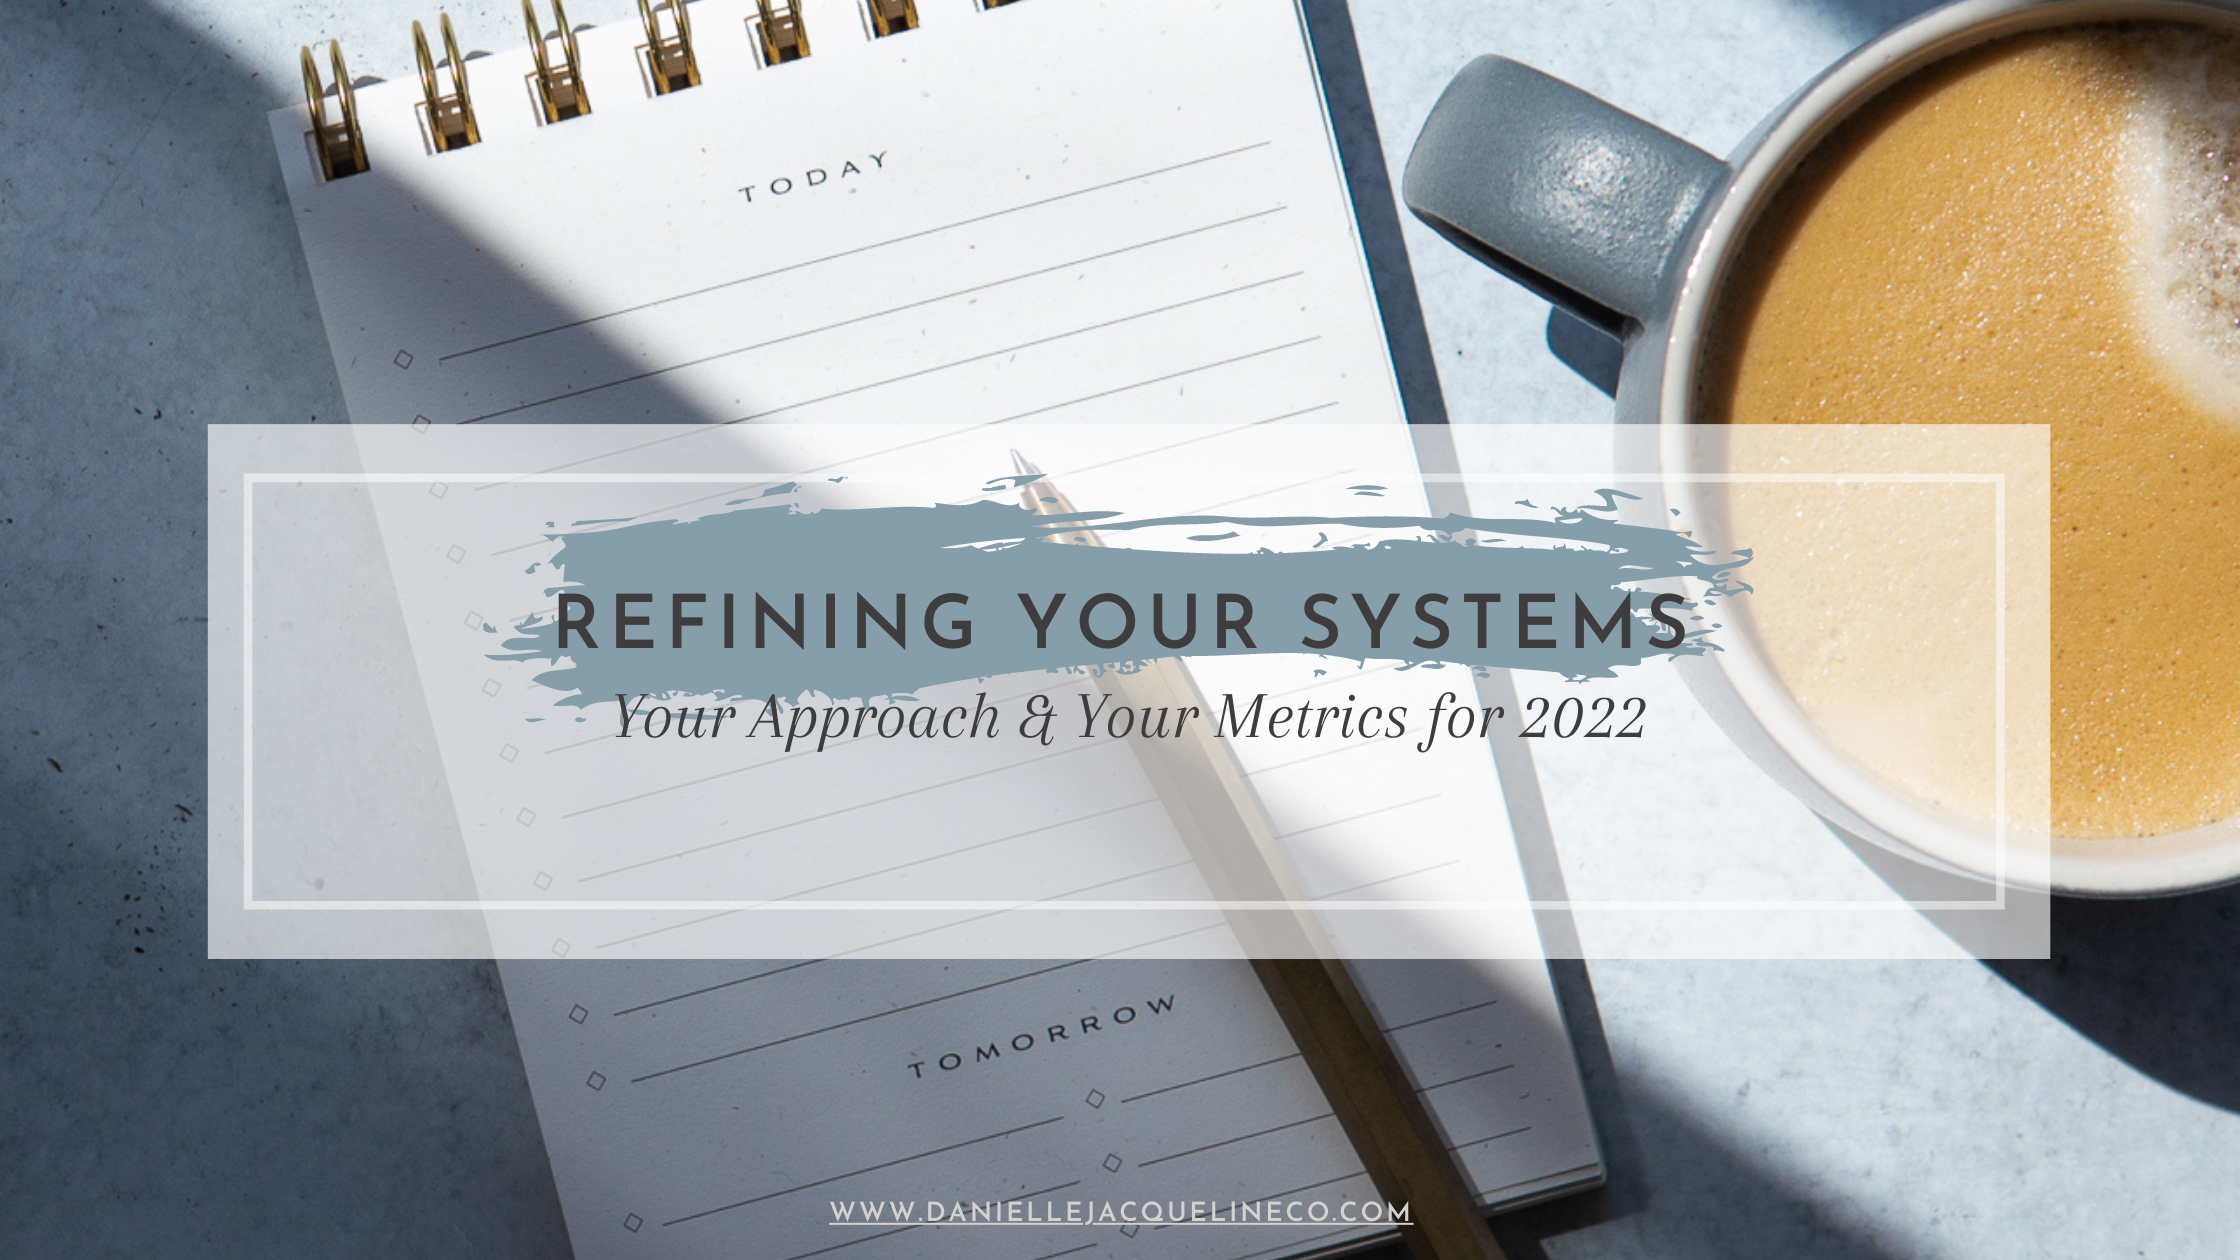 Refining Your Systems, Approach & Metrics